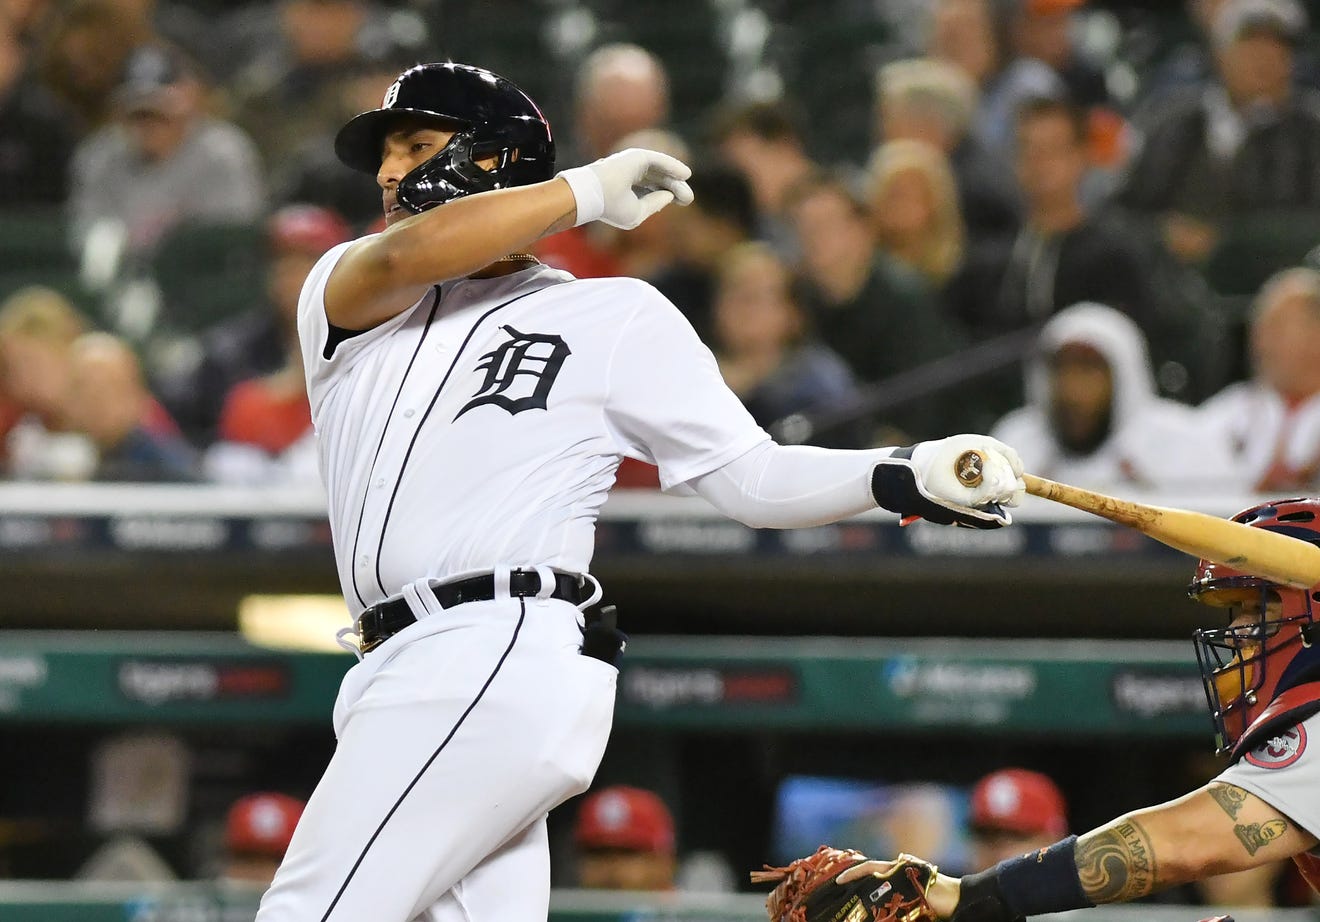 The Tigers placed infielder Isaac Paredes on the injured list on Thursday.